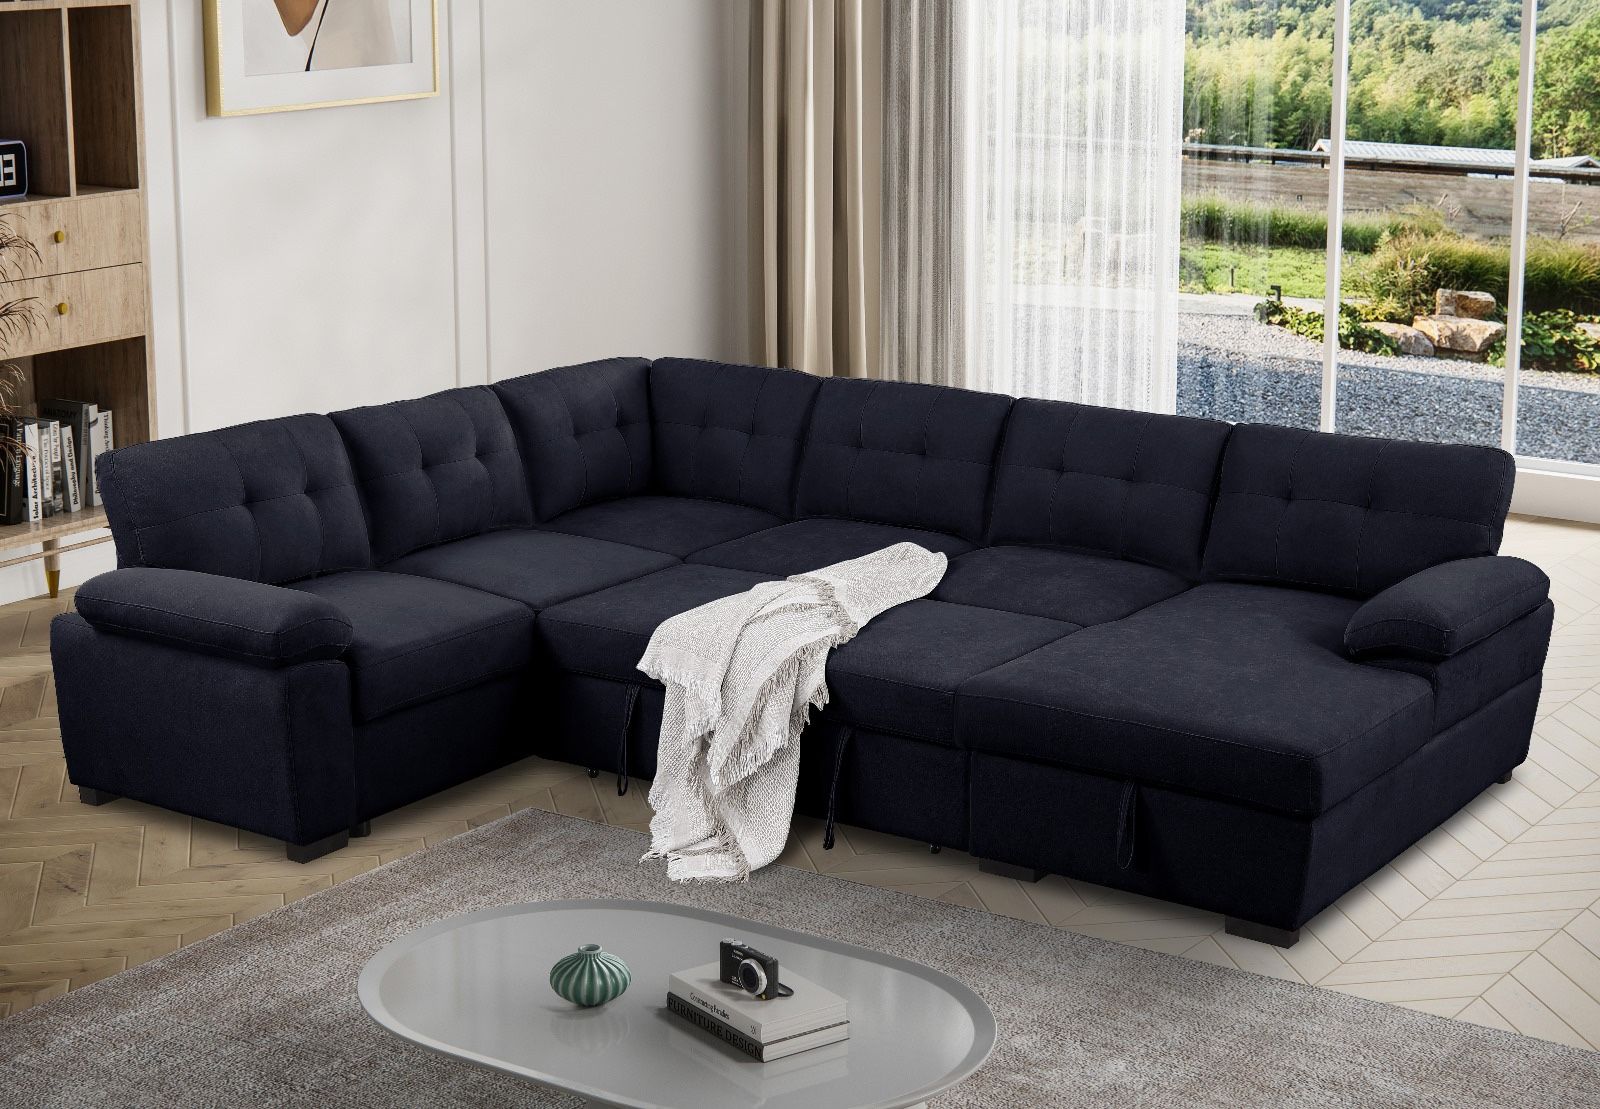 !New!! Large Sectional Sofa Bed, Sectional Couch With Storage, Pull Out Sofa Bed, Comfortable Sofa Bed, Sectionals, Sectional